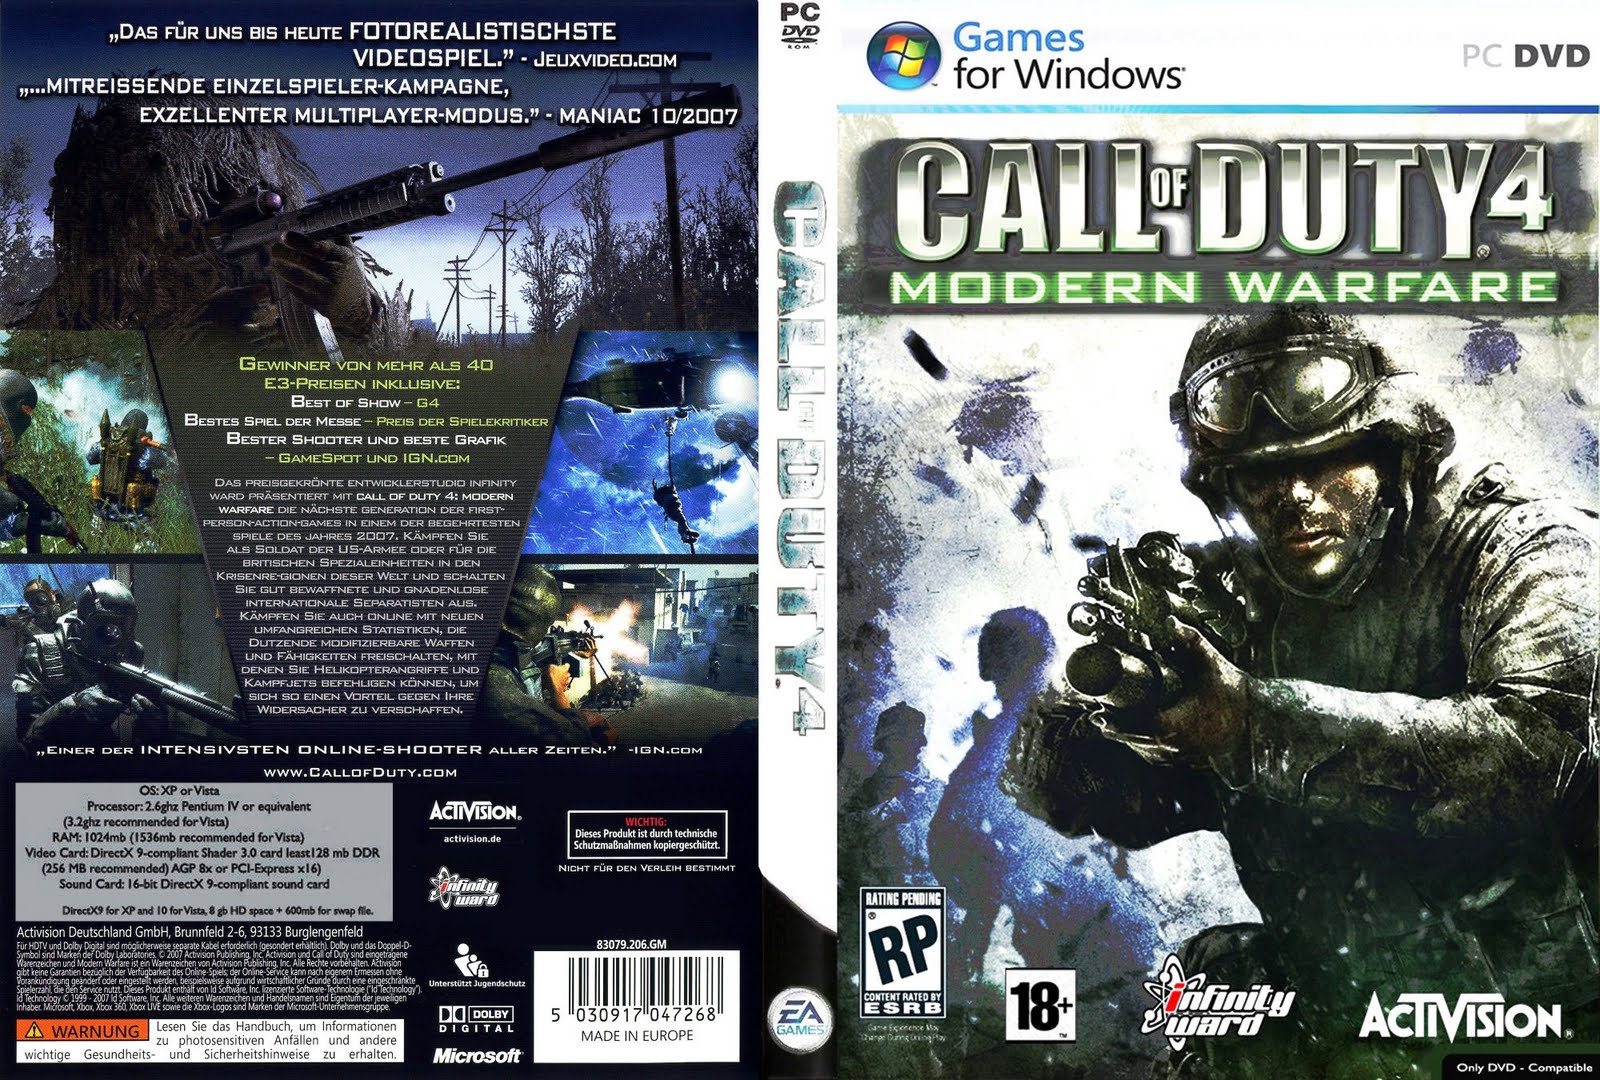 Download Call of Duty 4 Modern Warfare - Torrent Game for PC